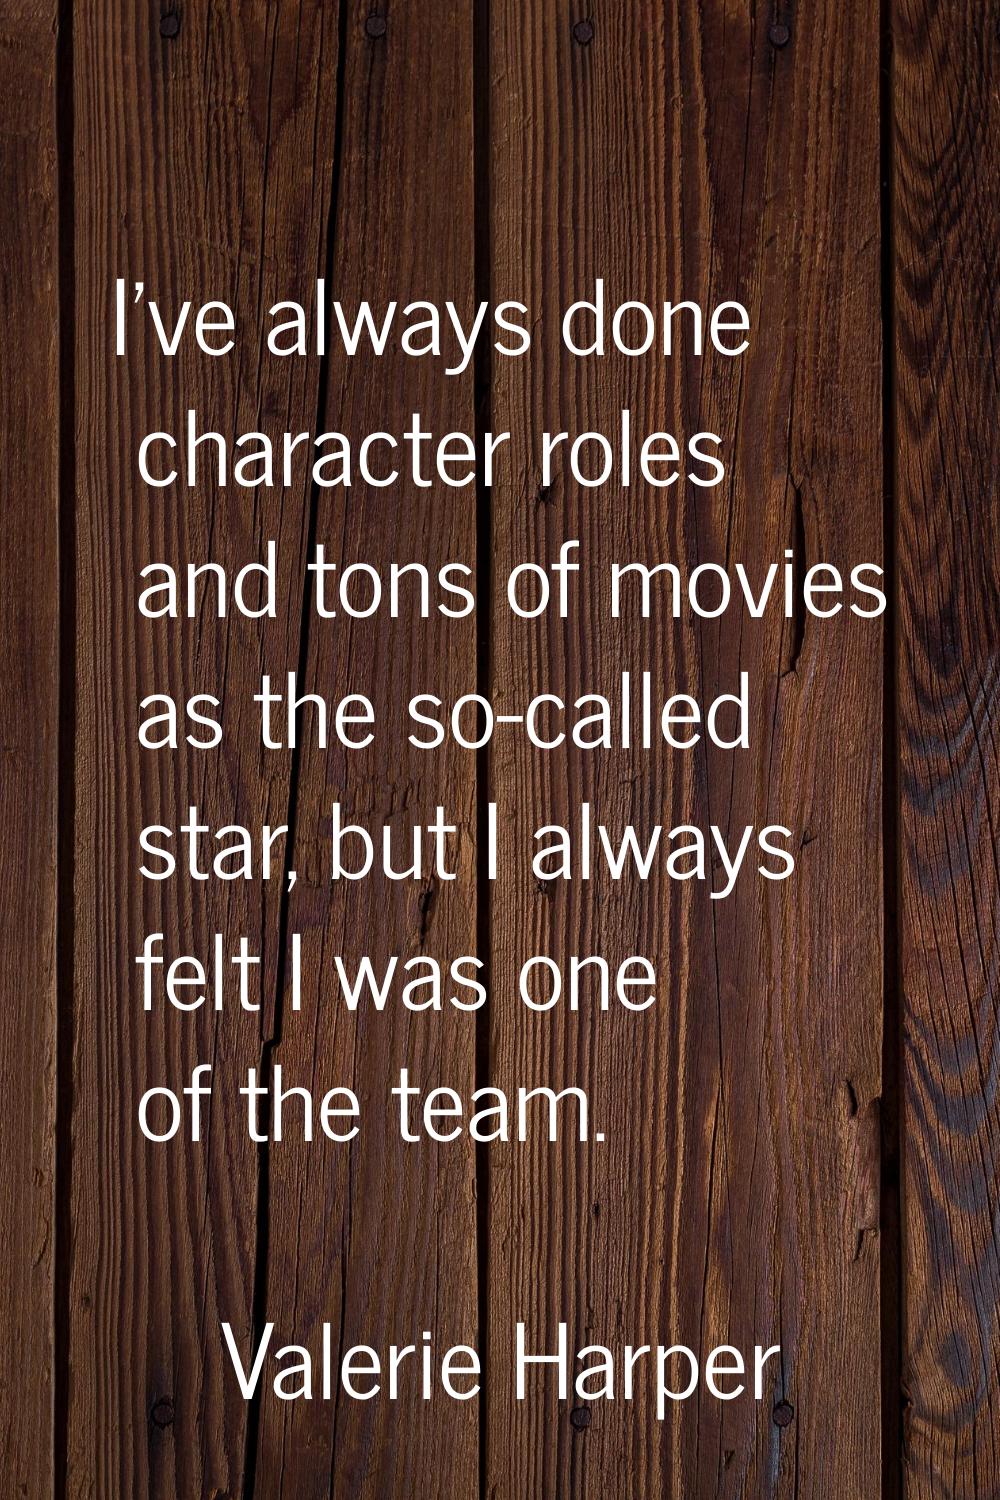 I've always done character roles and tons of movies as the so-called star, but I always felt I was 